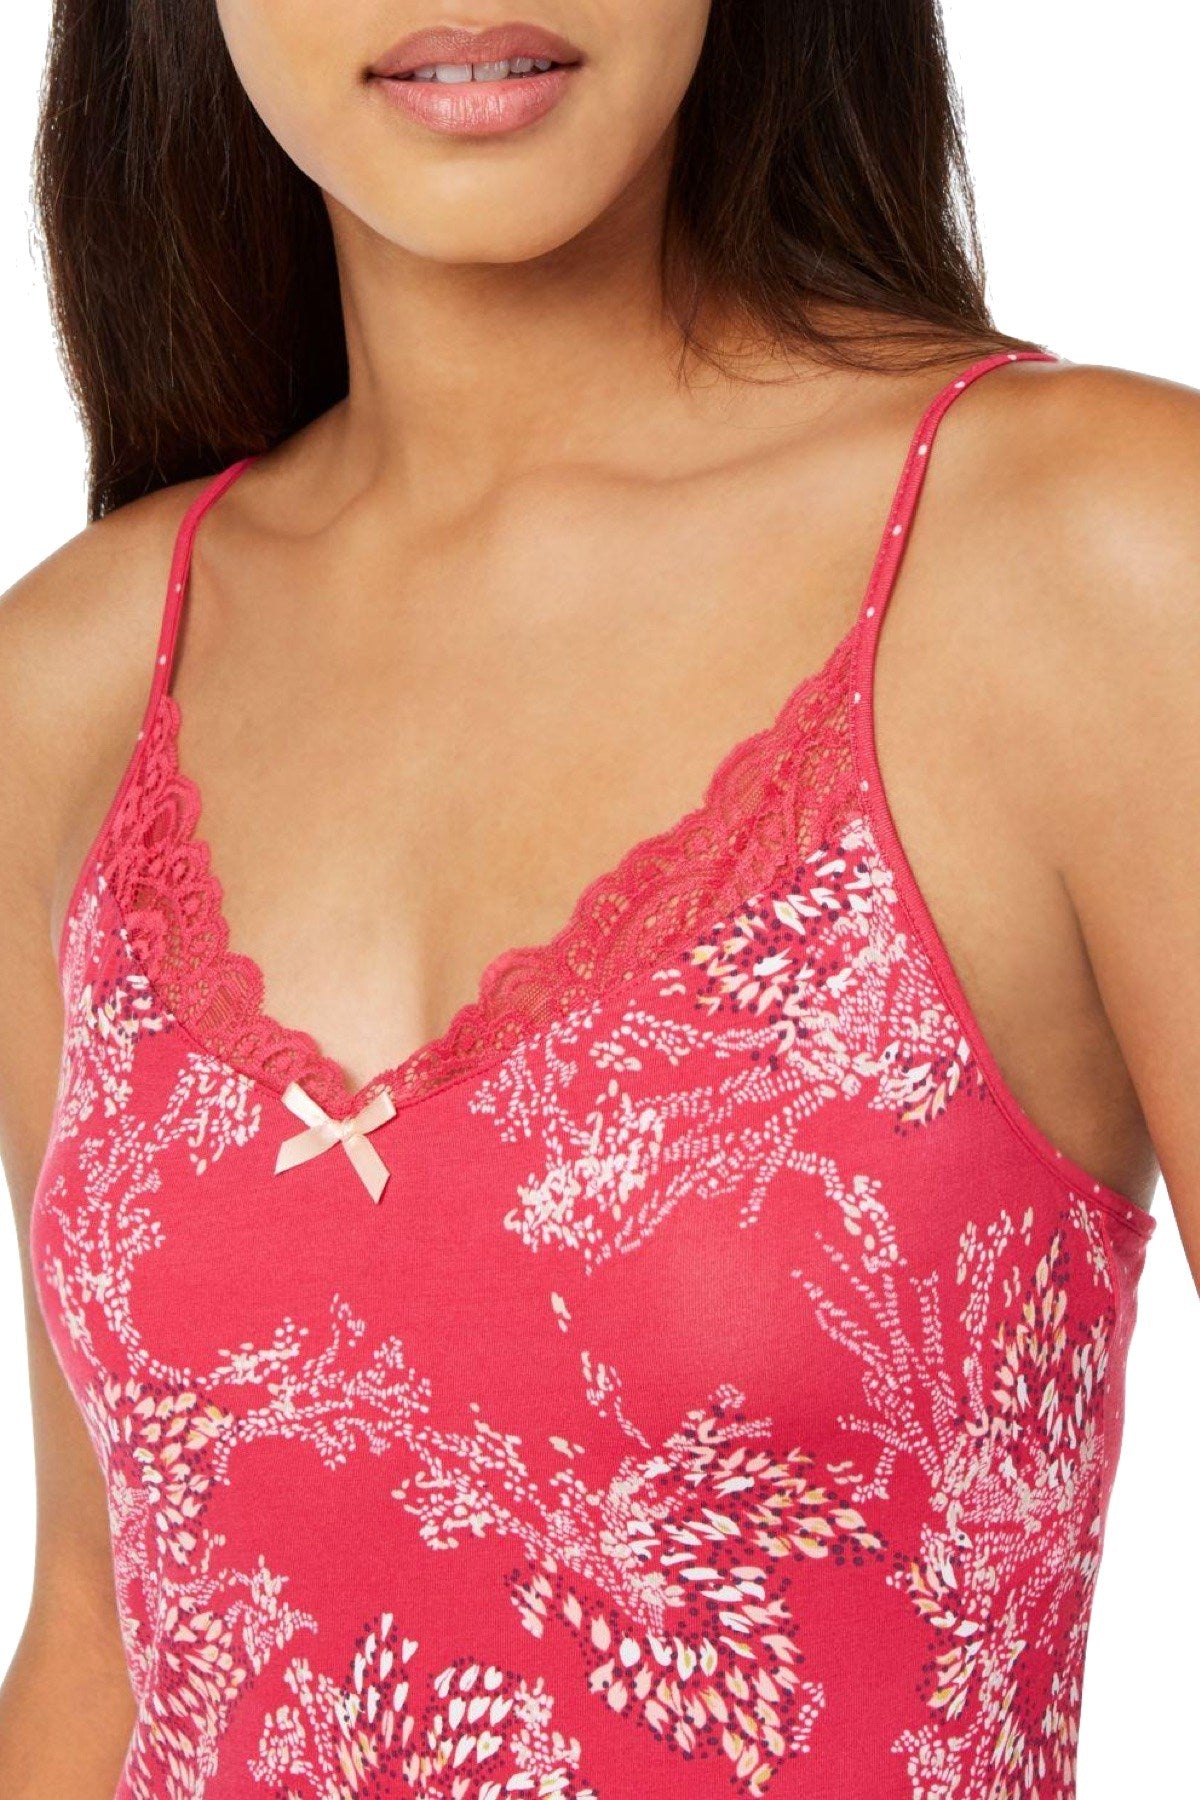 Sesoire Berry Pink Printed Lace Contrast Chemise